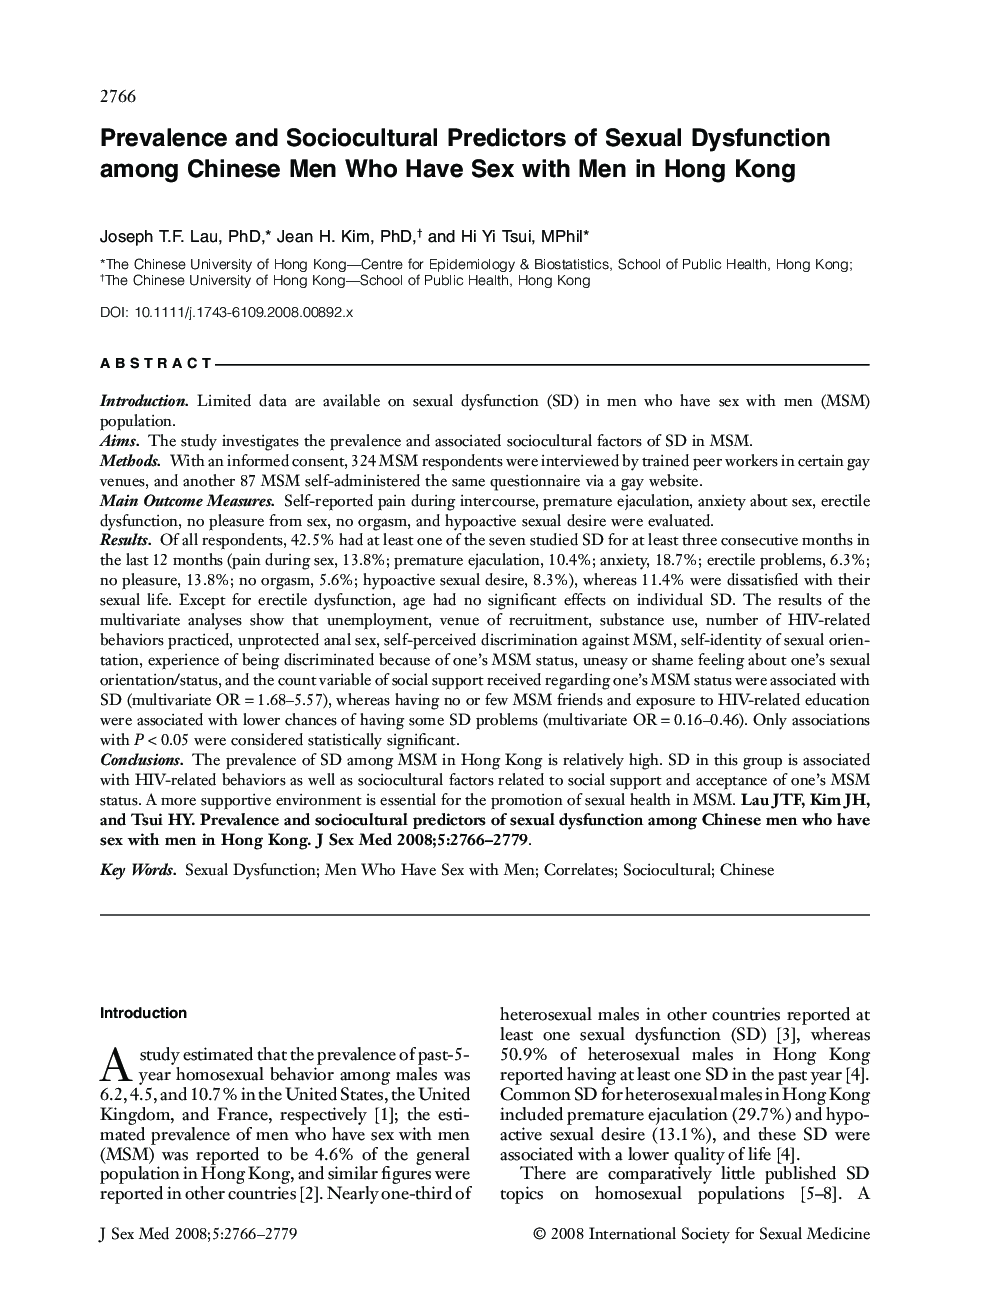 Prevalence and Sociocultural Predictors of Sexual Dysfunction among Chinese Men Who Have Sex with Men in Hong Kong